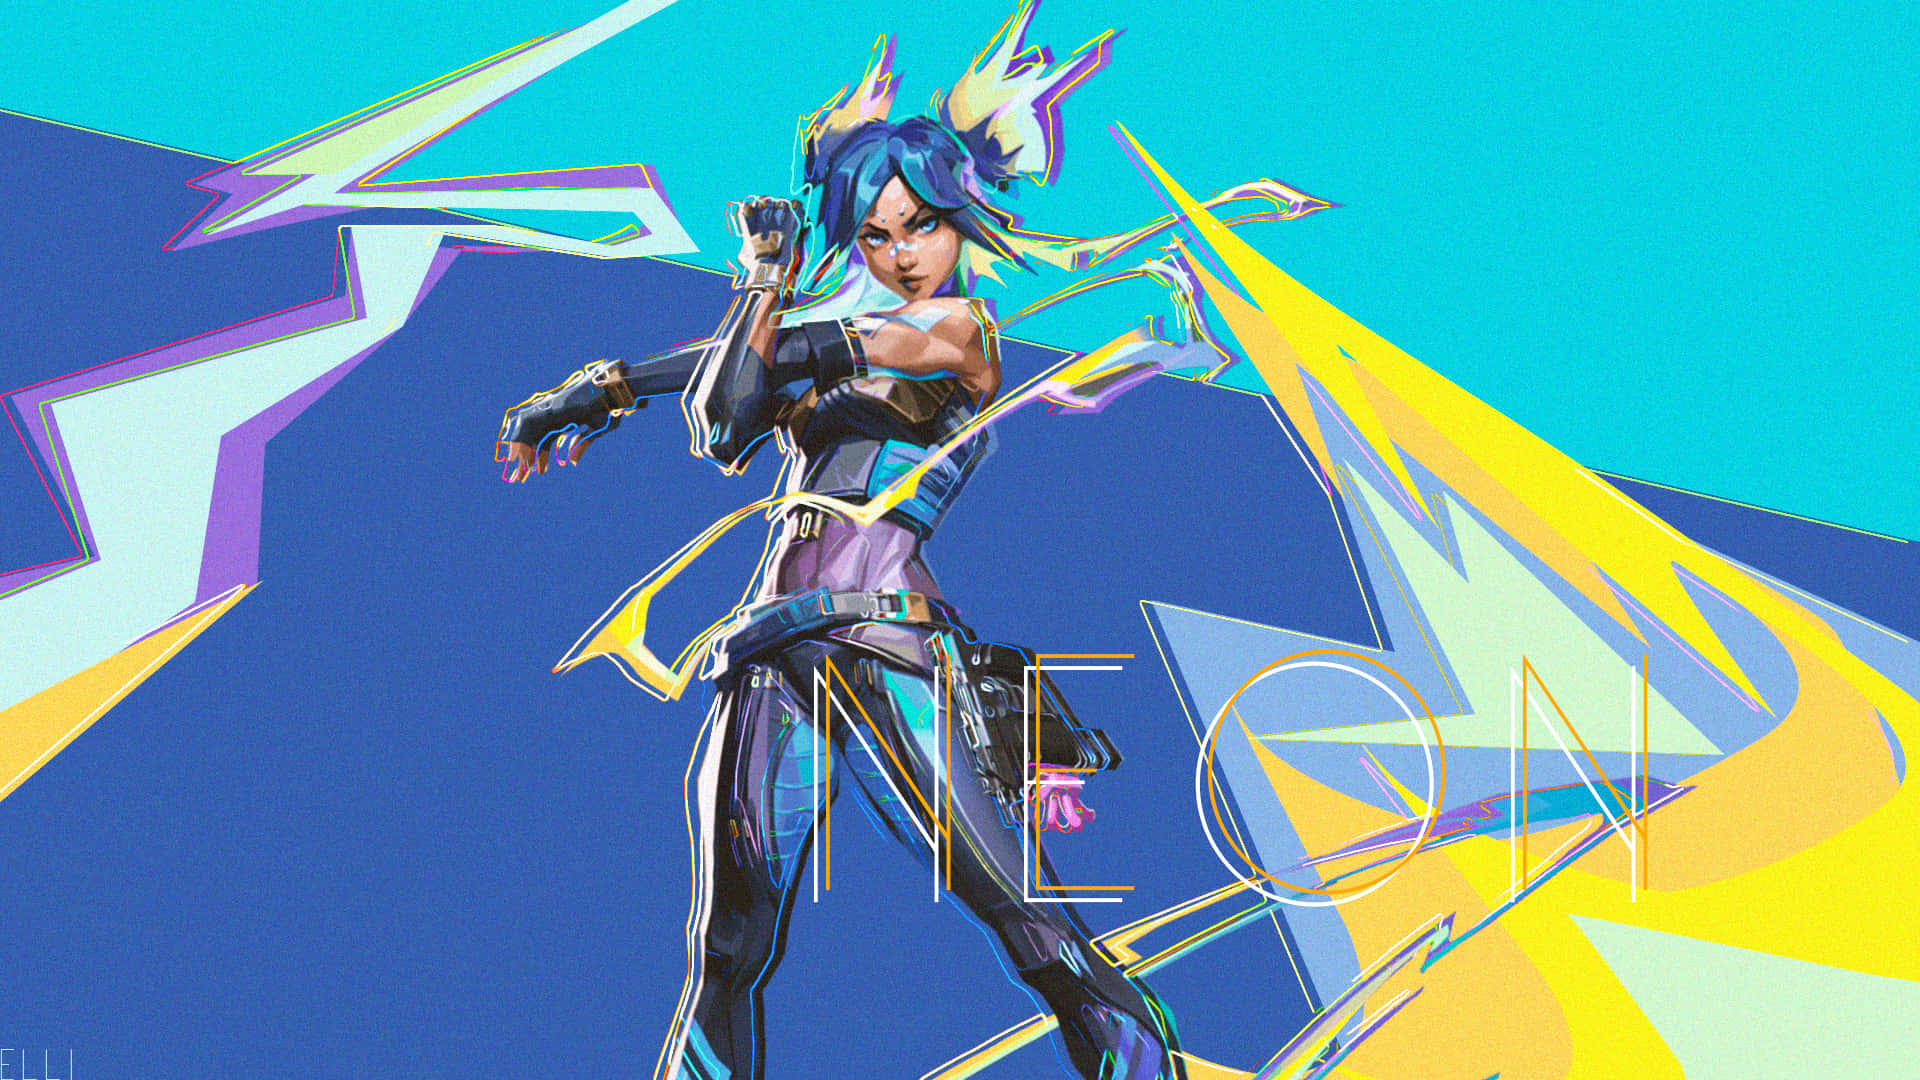 "Fire up your battle instincts with Neon Valorant!" Wallpaper